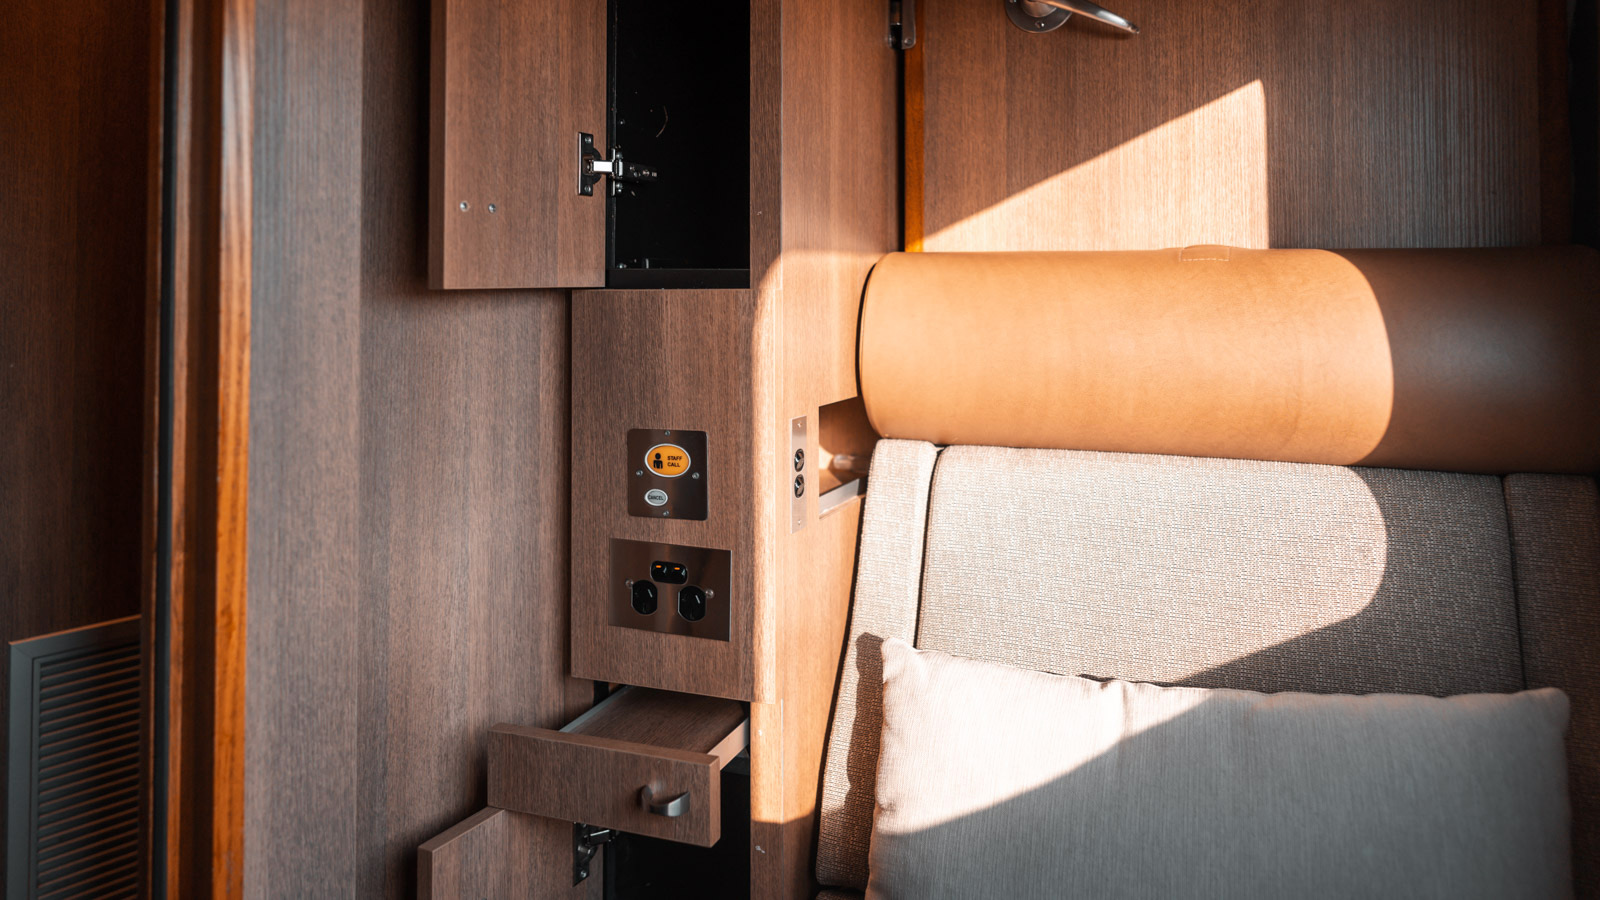 The Ghan Gold Single cabin seat